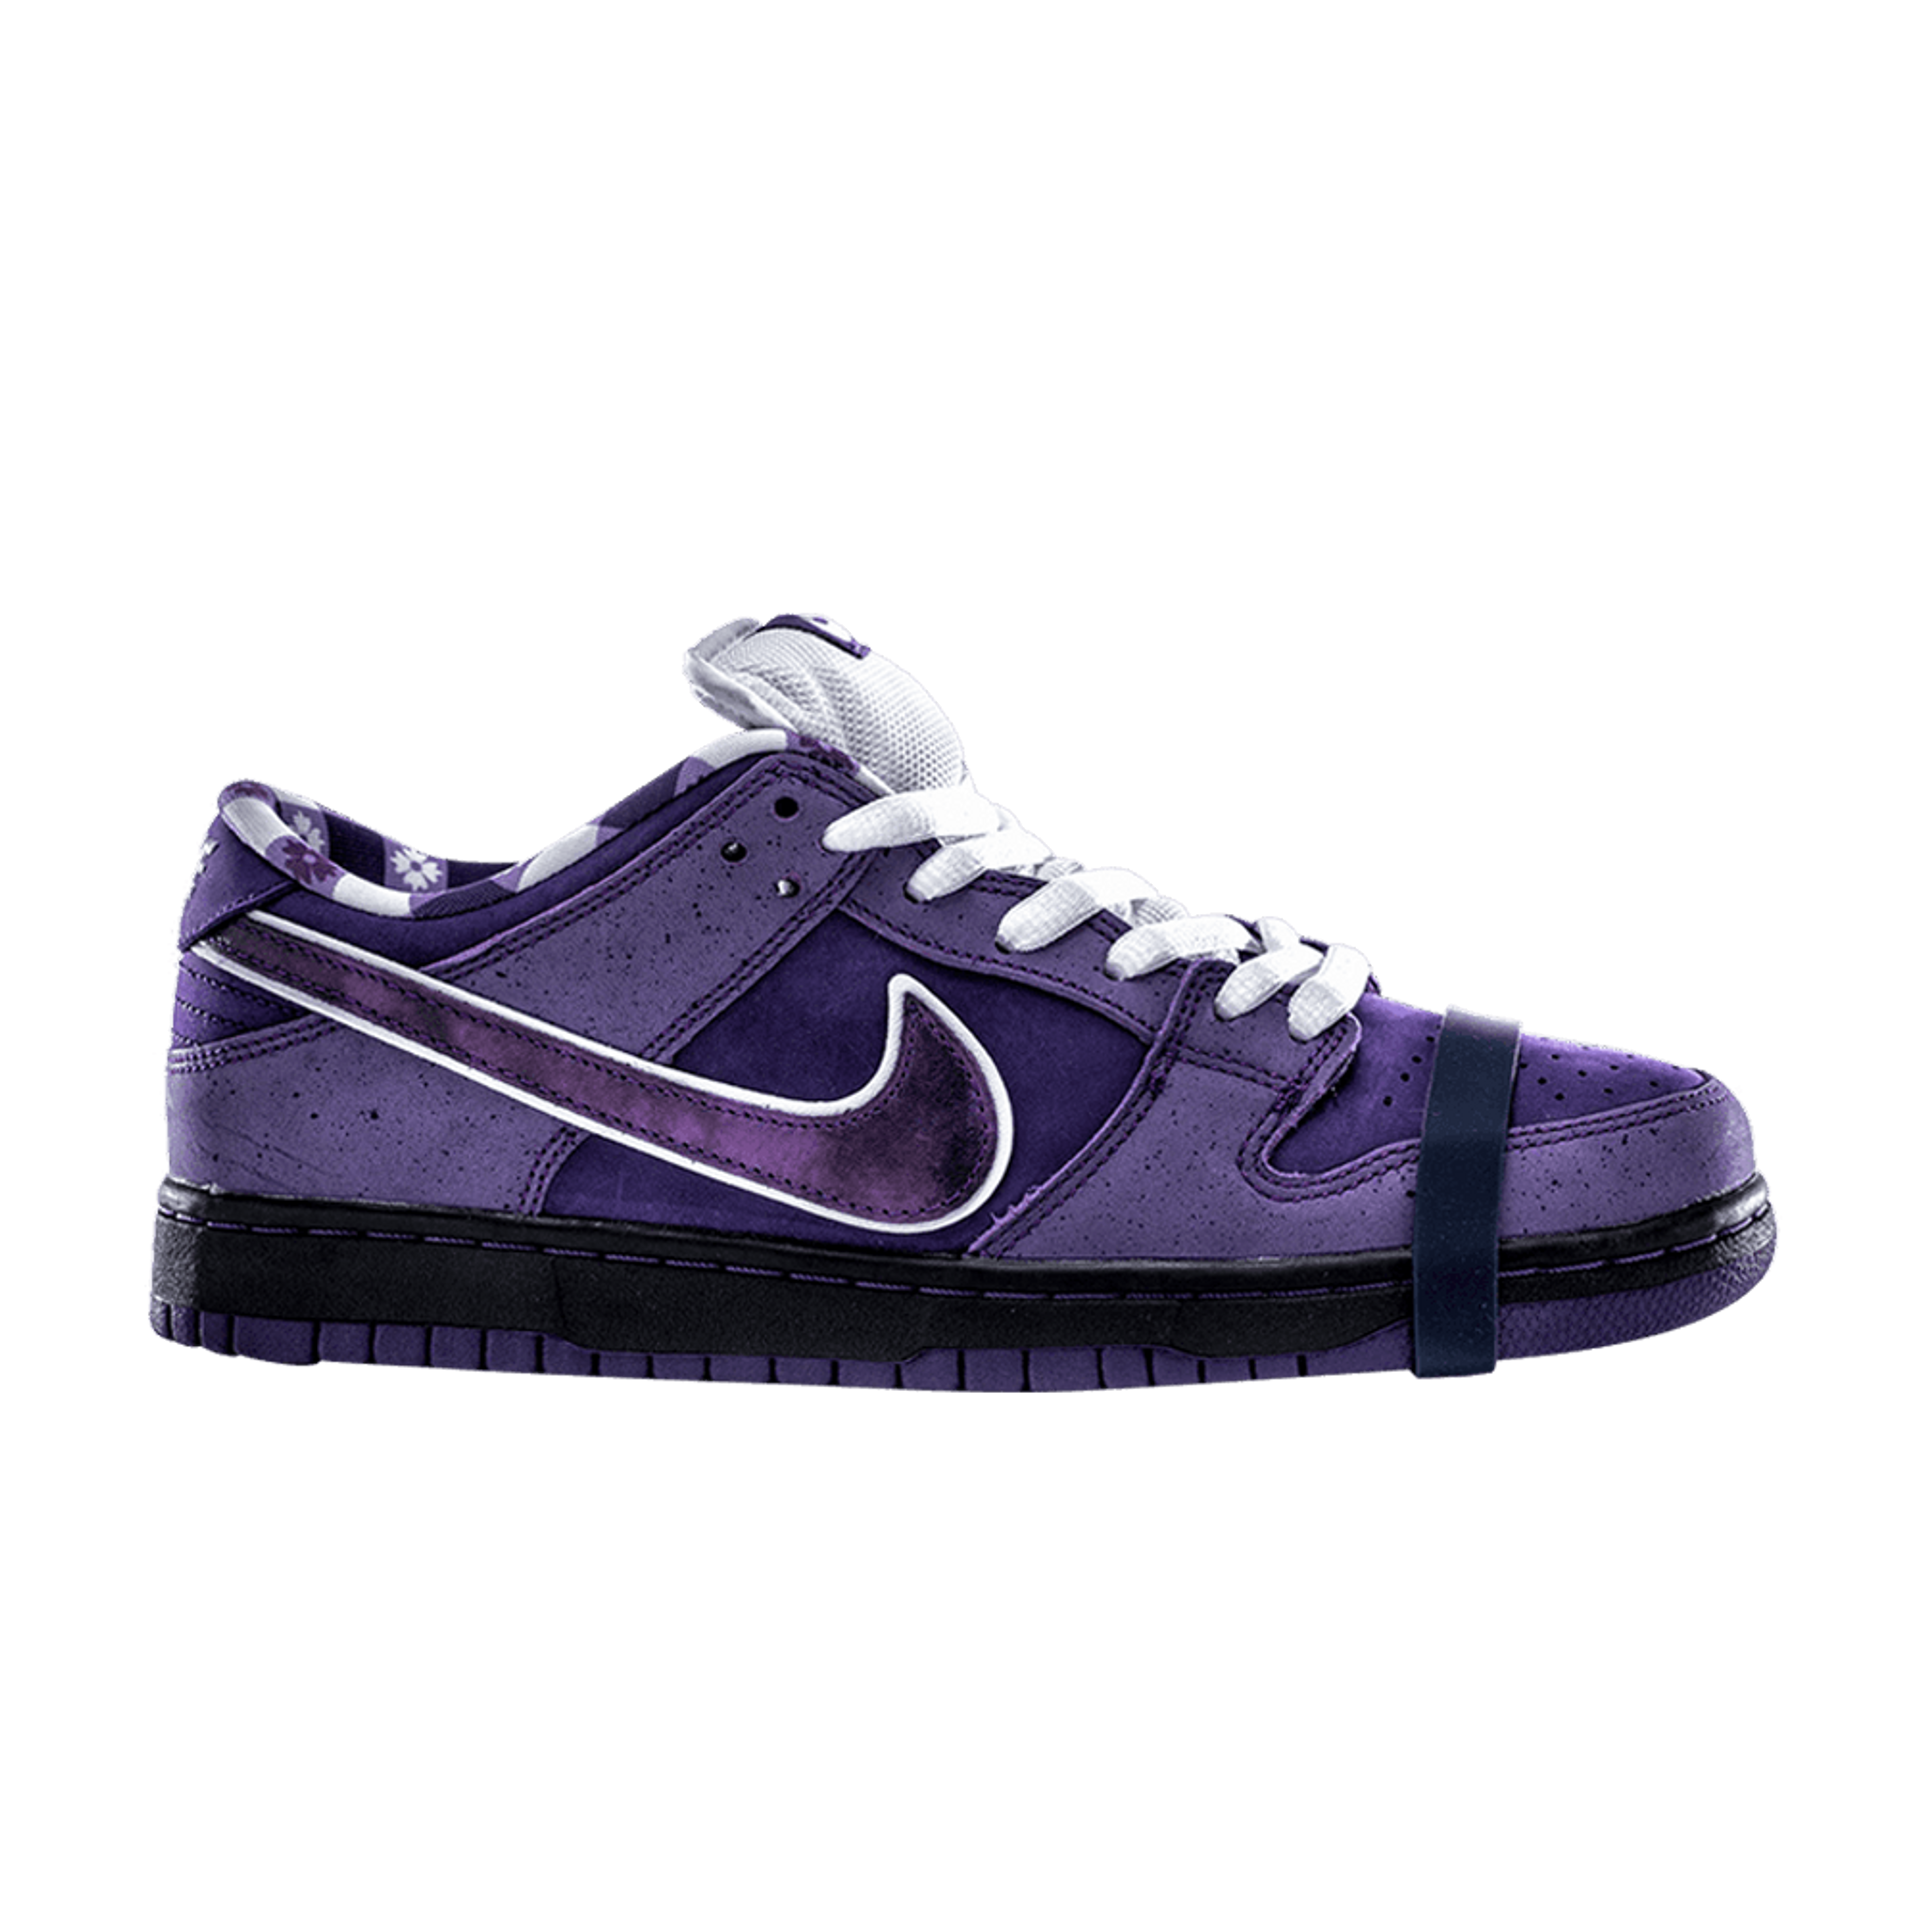 Nike Concepts x Dunk Low SB 'Purple Lobster' Special Box